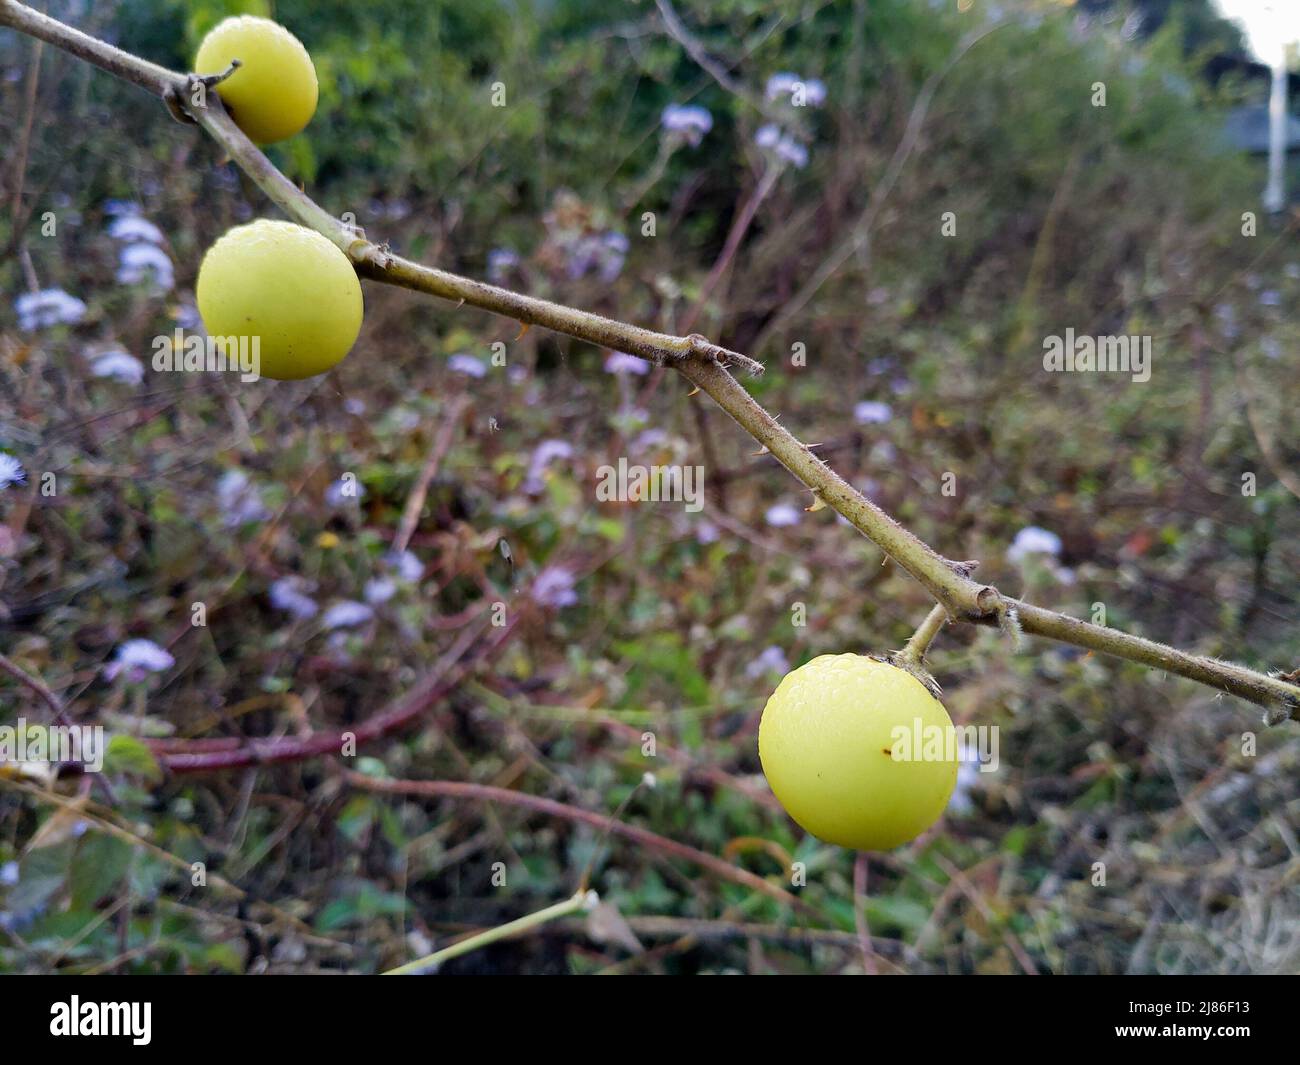 A close up shot of blackberry jam fruit. Rosenbergiodendron formosum is a species of flowering plant in the madder family. uttarakhand India Stock Photo